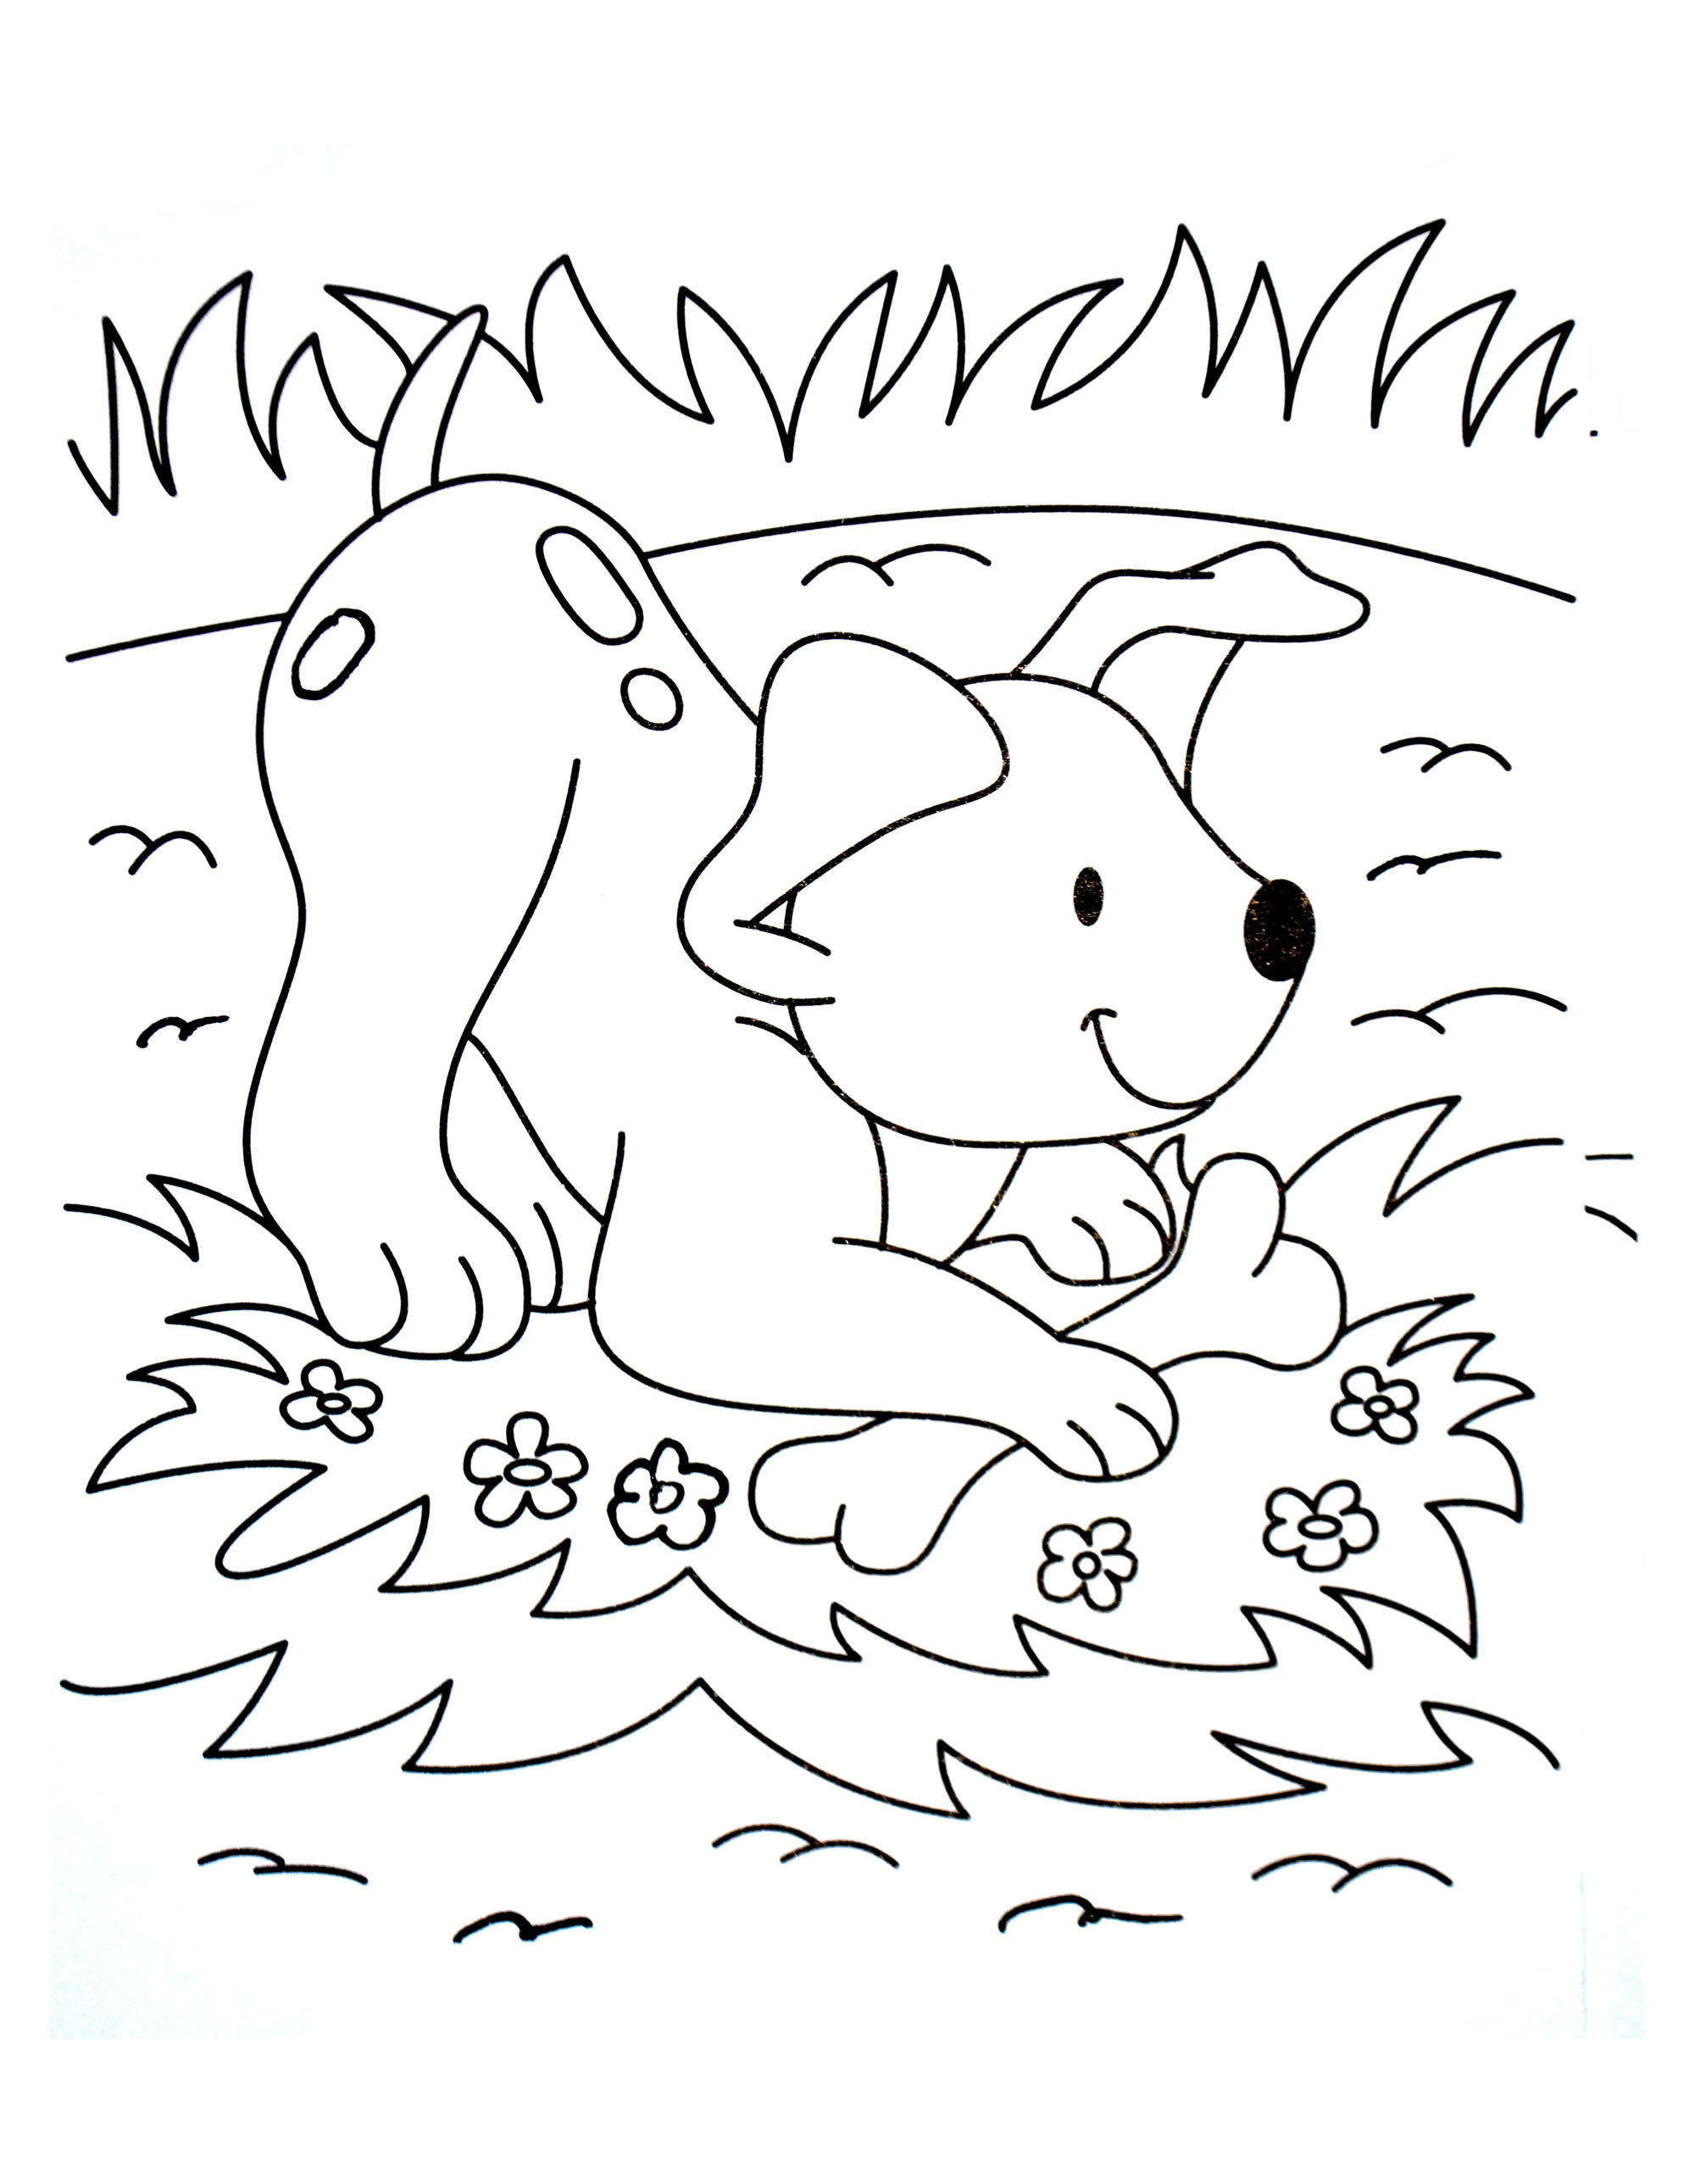 Amazing dog coloring for kids